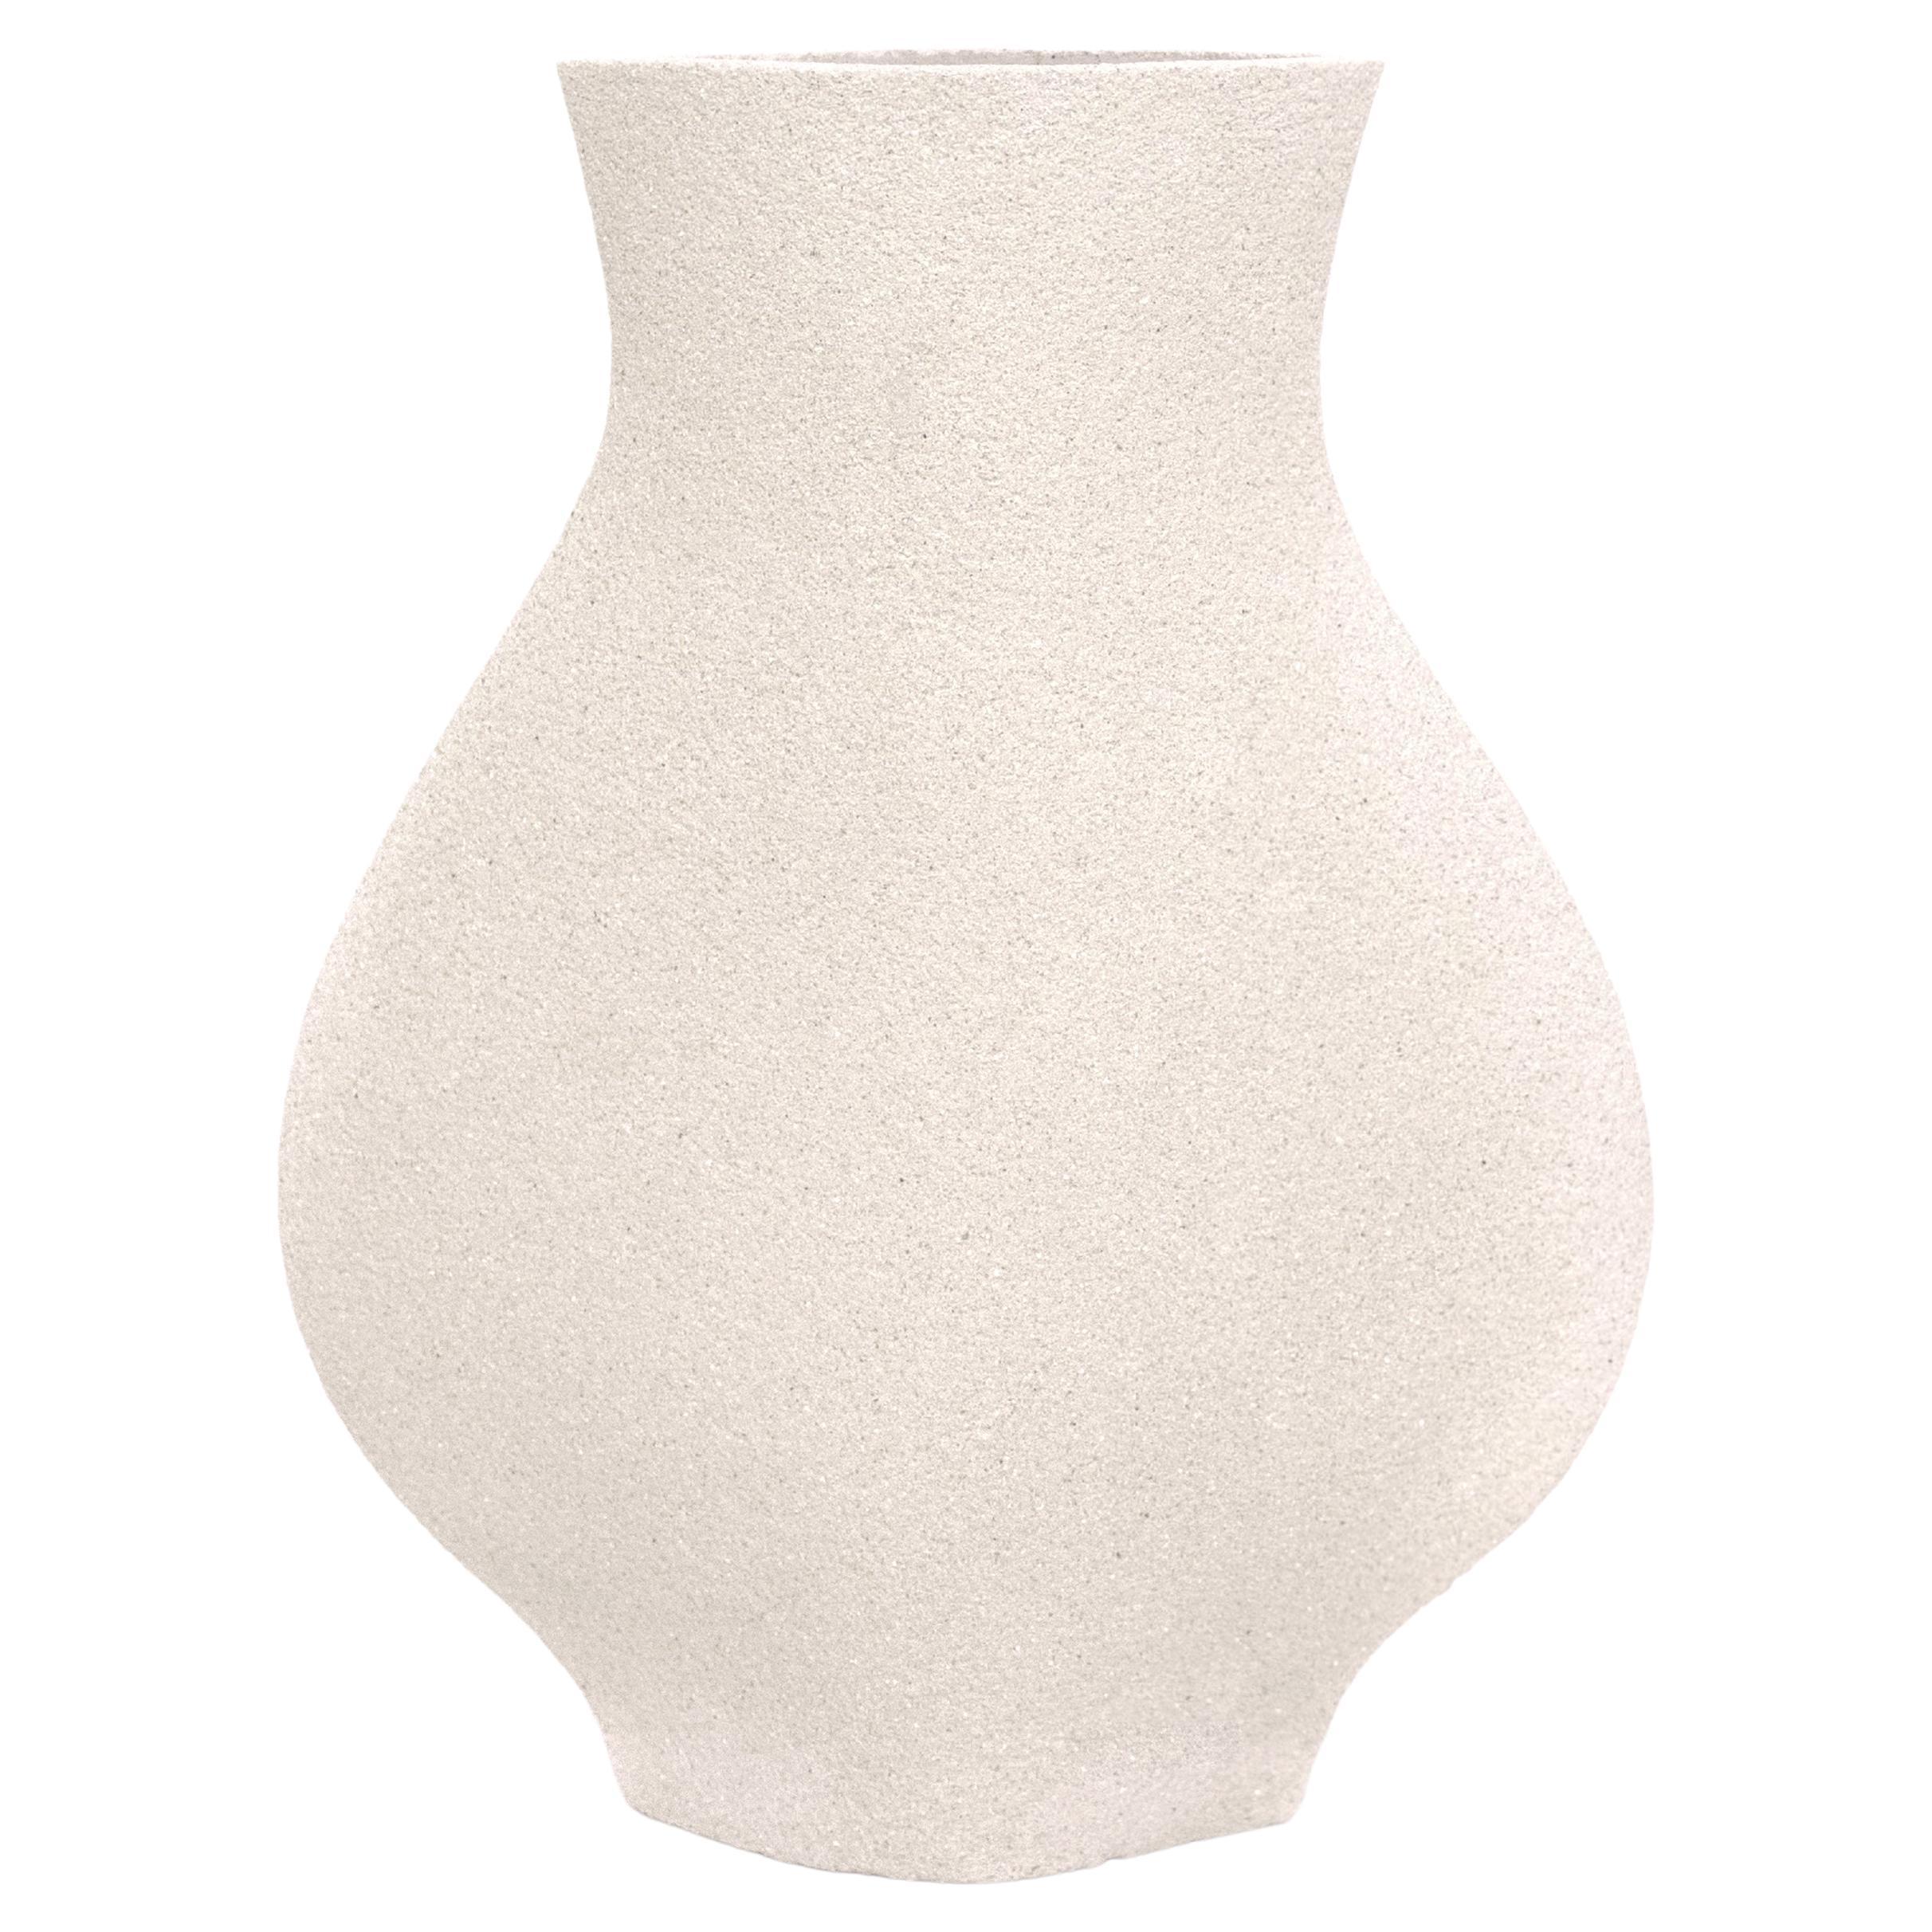 21st Century Jarre Vase in White Ceramic, Hand-Crafted in France For Sale